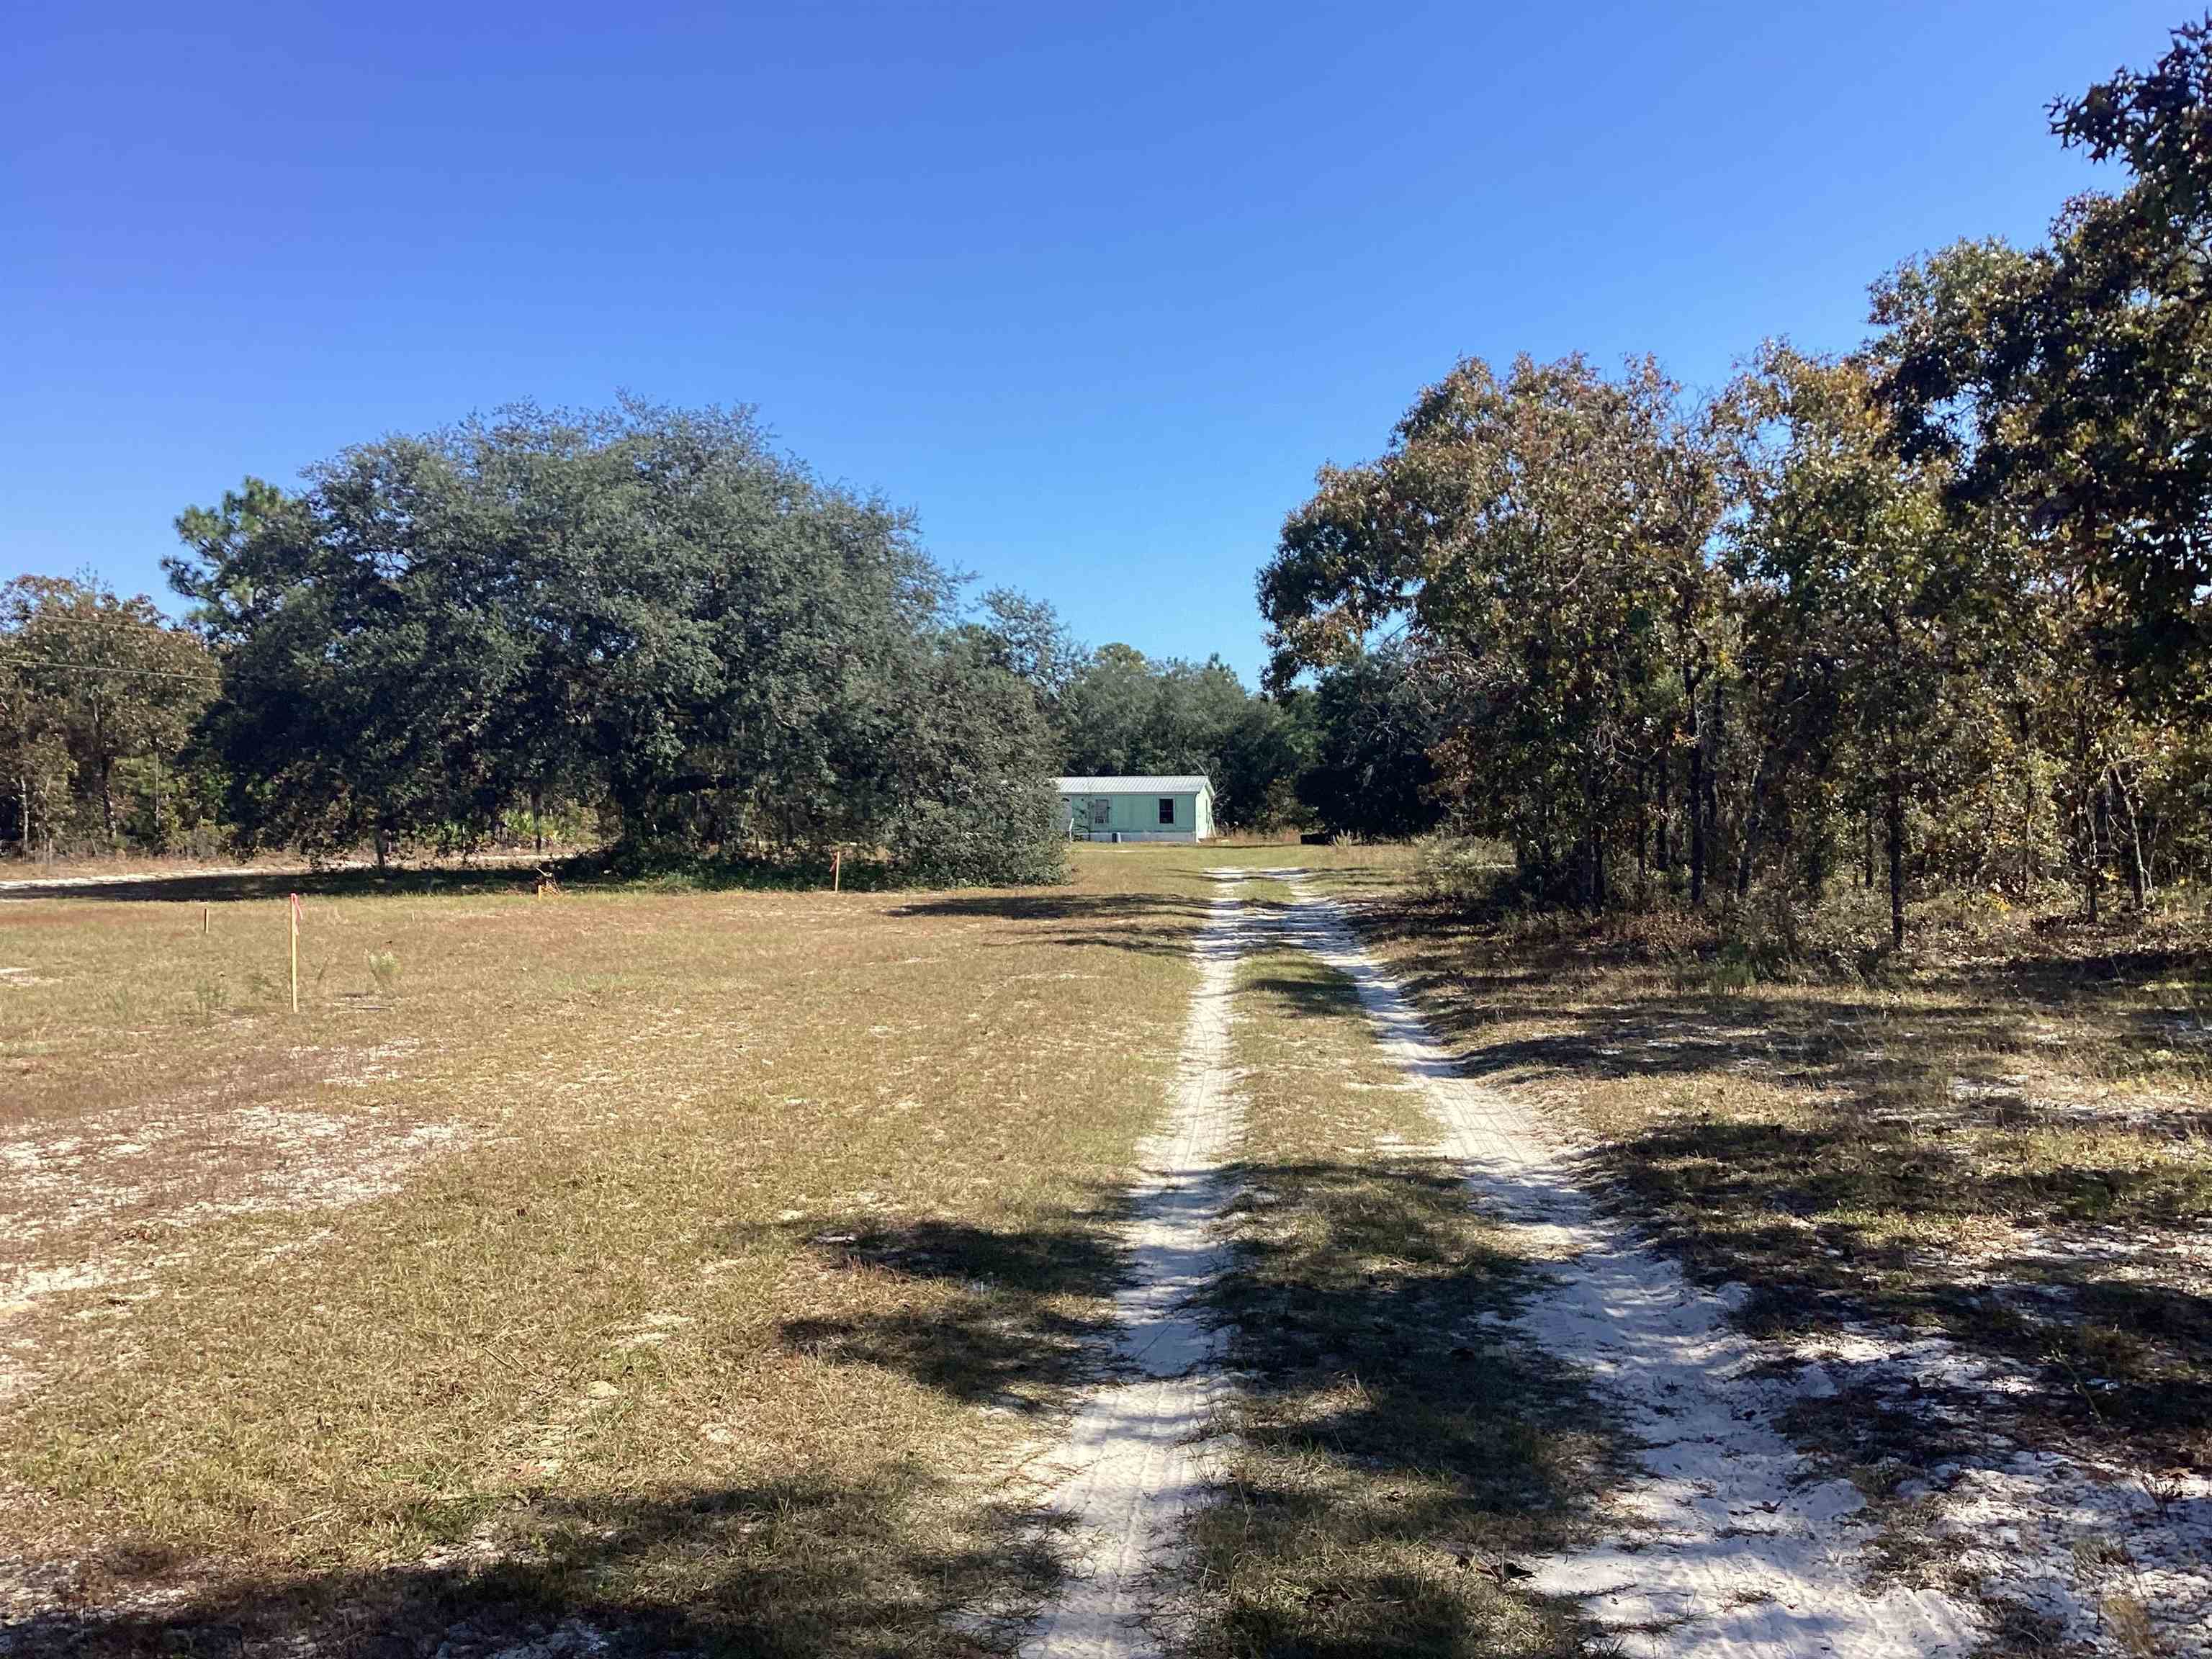 Calling all investors!!!! Checkout this older 4 bedroom 2 bath mobile home on 3.26 acres in the Lake Talquin community of Quincy Fl. This home sits on a 1.70 acres parcel, the adjacent parcel is 1.56 acres where another mobile can be added. Home will need work, but has the potential for good income. There is an abundant of wildlife on the property. Home is on Talquin water.